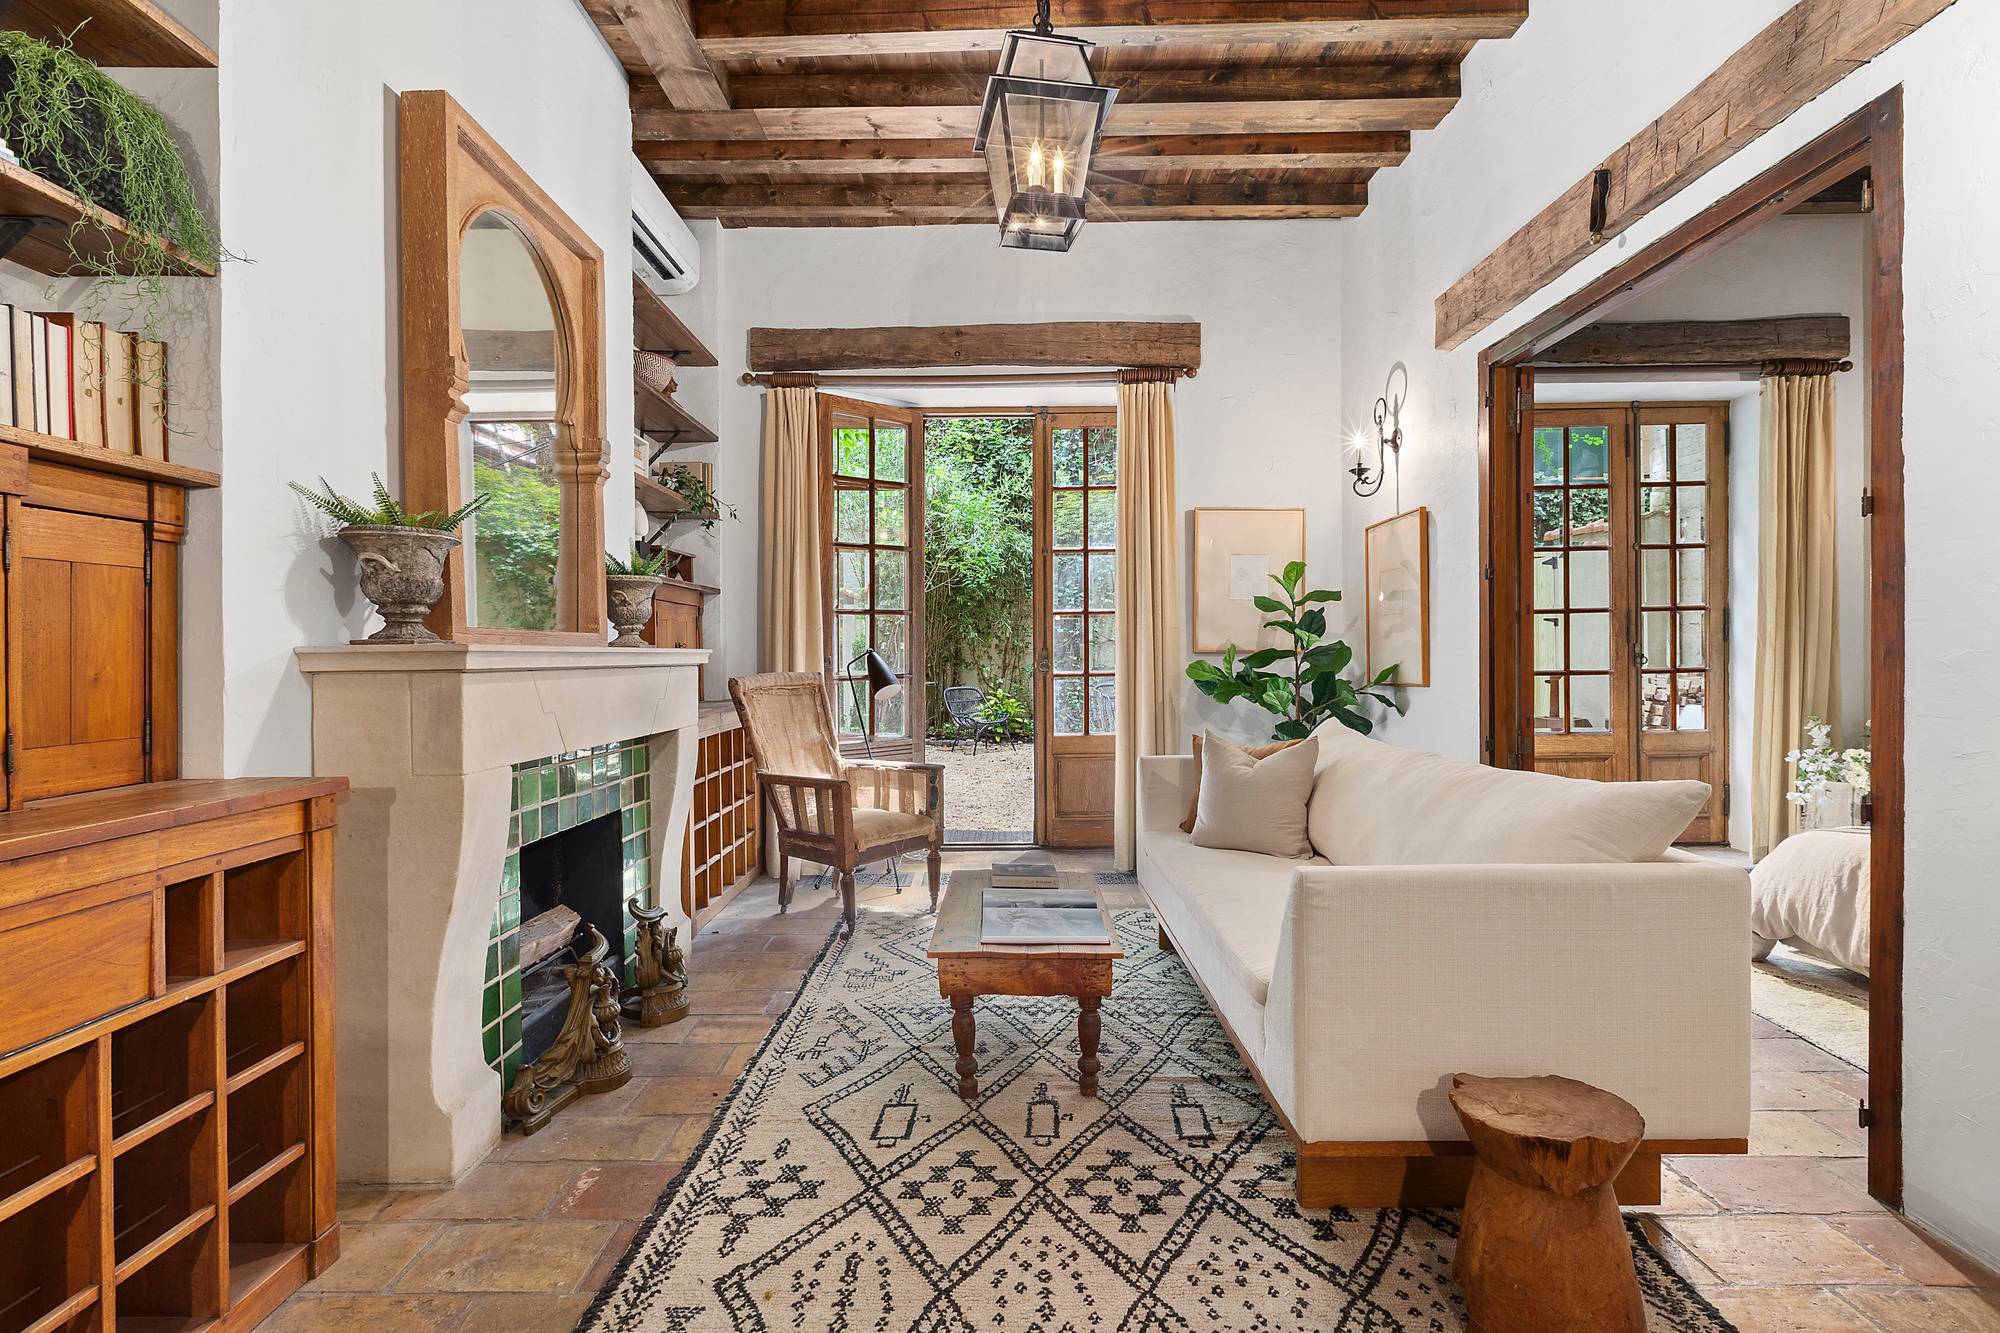 A West Village one bedroom jewel with a tremendous landscaped and irrigated garden designed by renowned architects Fairfax and Sammons to emulate a Provincial farmhouse of yesteryear.